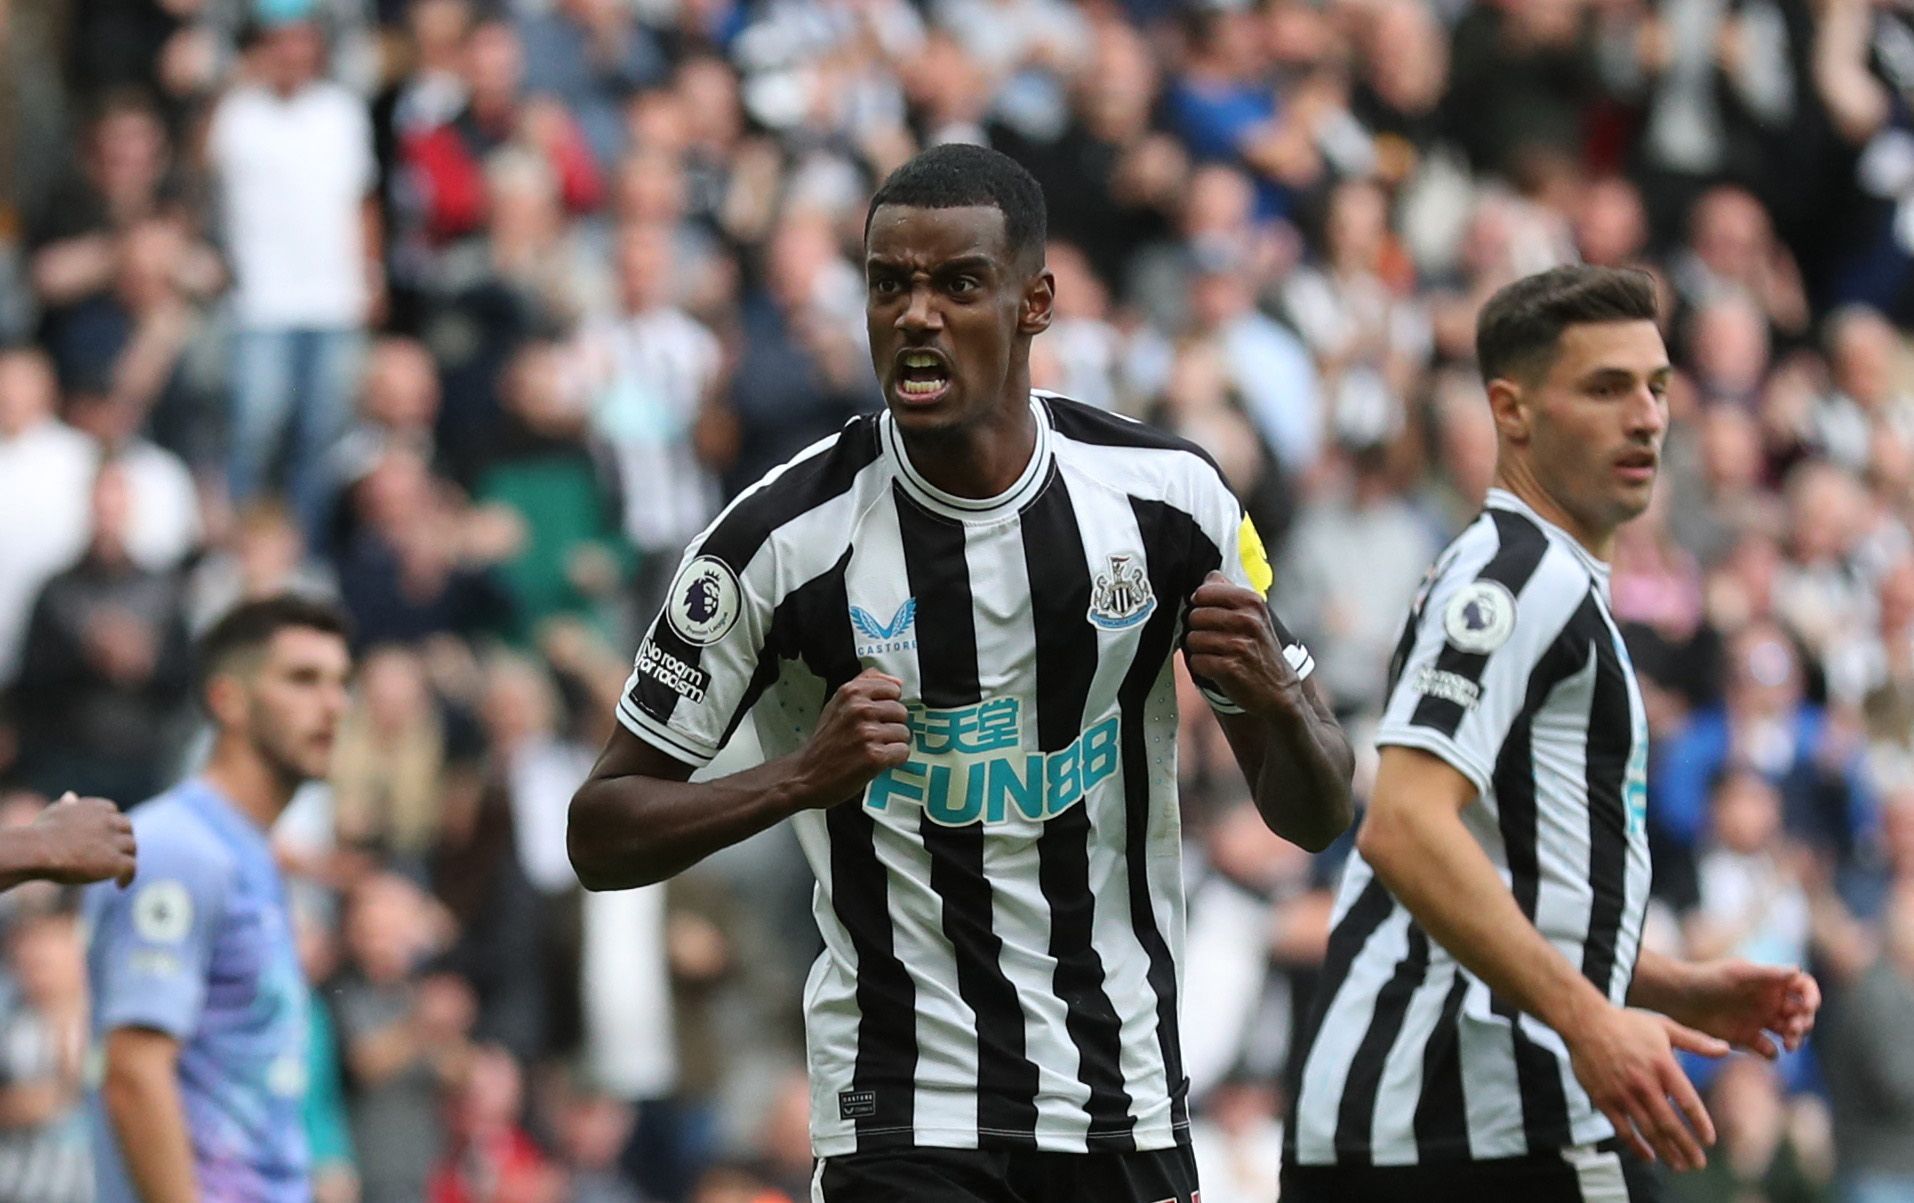  Alexander Isak celebrates scoring a goal for Newcastle United during a match at St. James' Park.